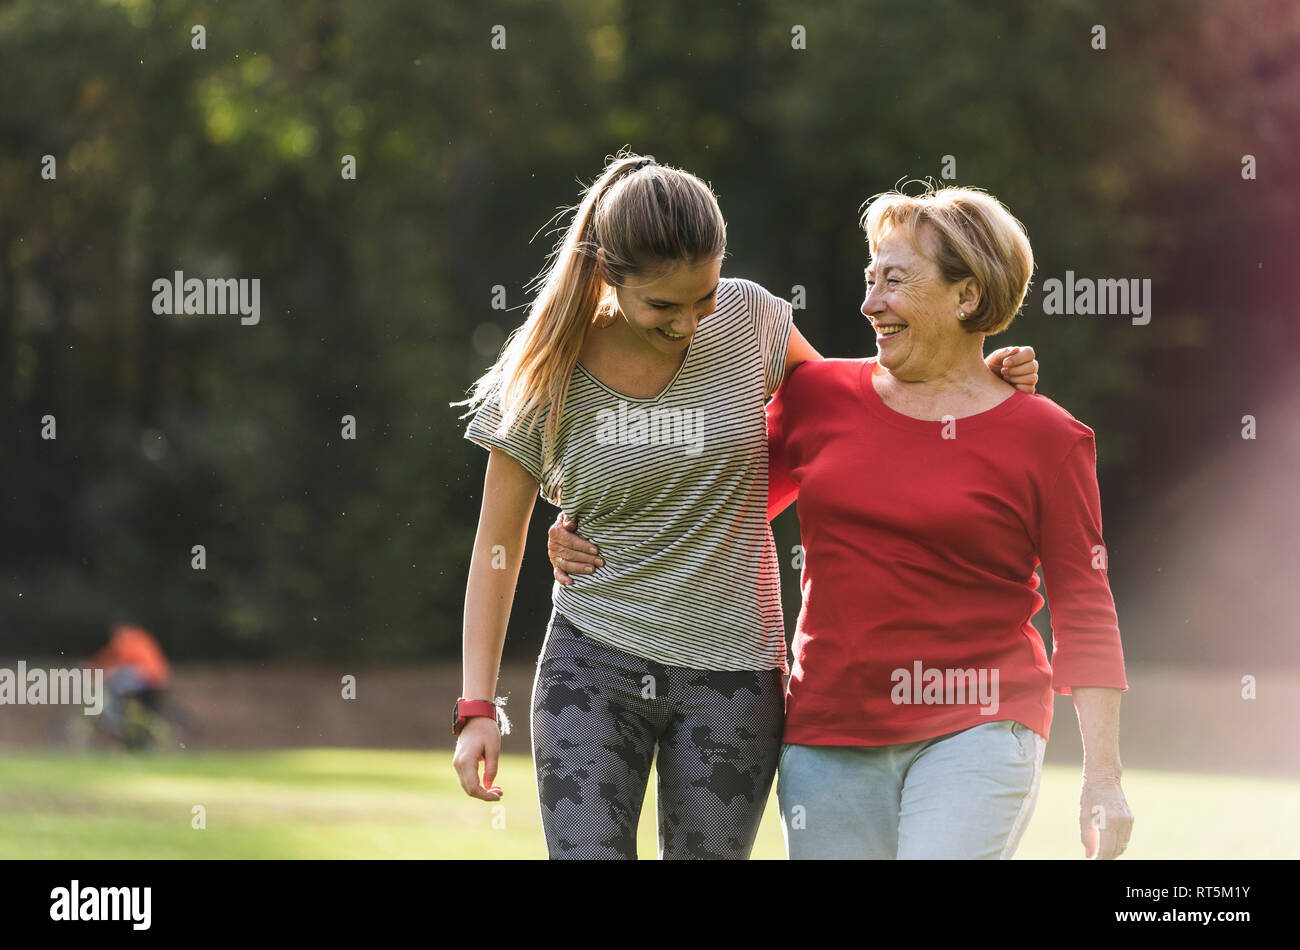 Granddaughter and grandmother having fun, jogging together in the park Stock Photo